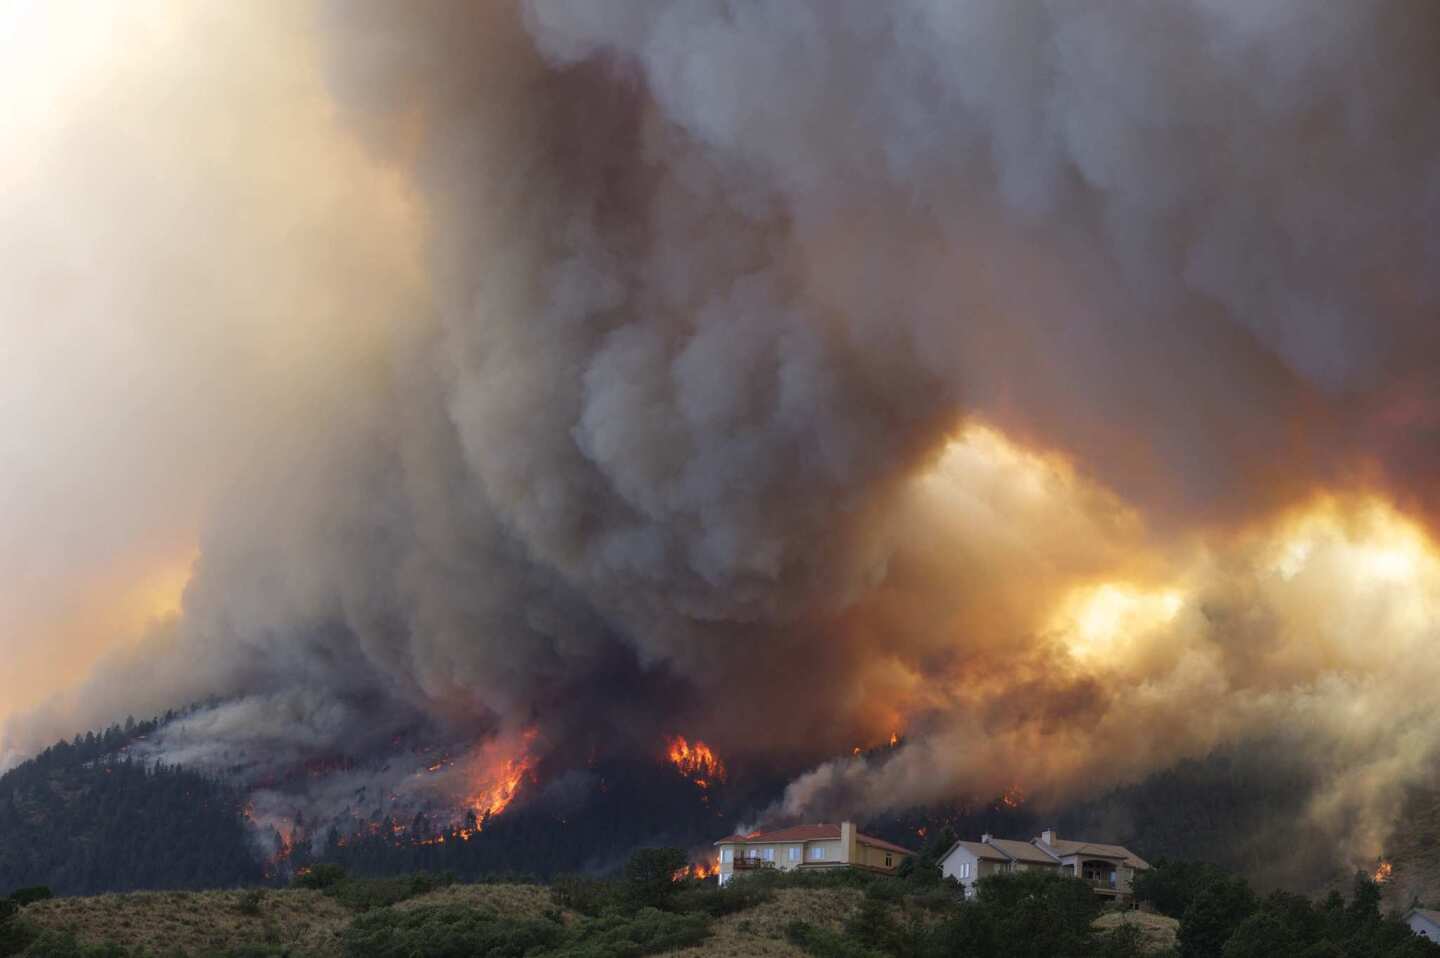 The Waldo Canyon fire moved into subdivisions and destroyed homes in Colorado Springs, Colo.